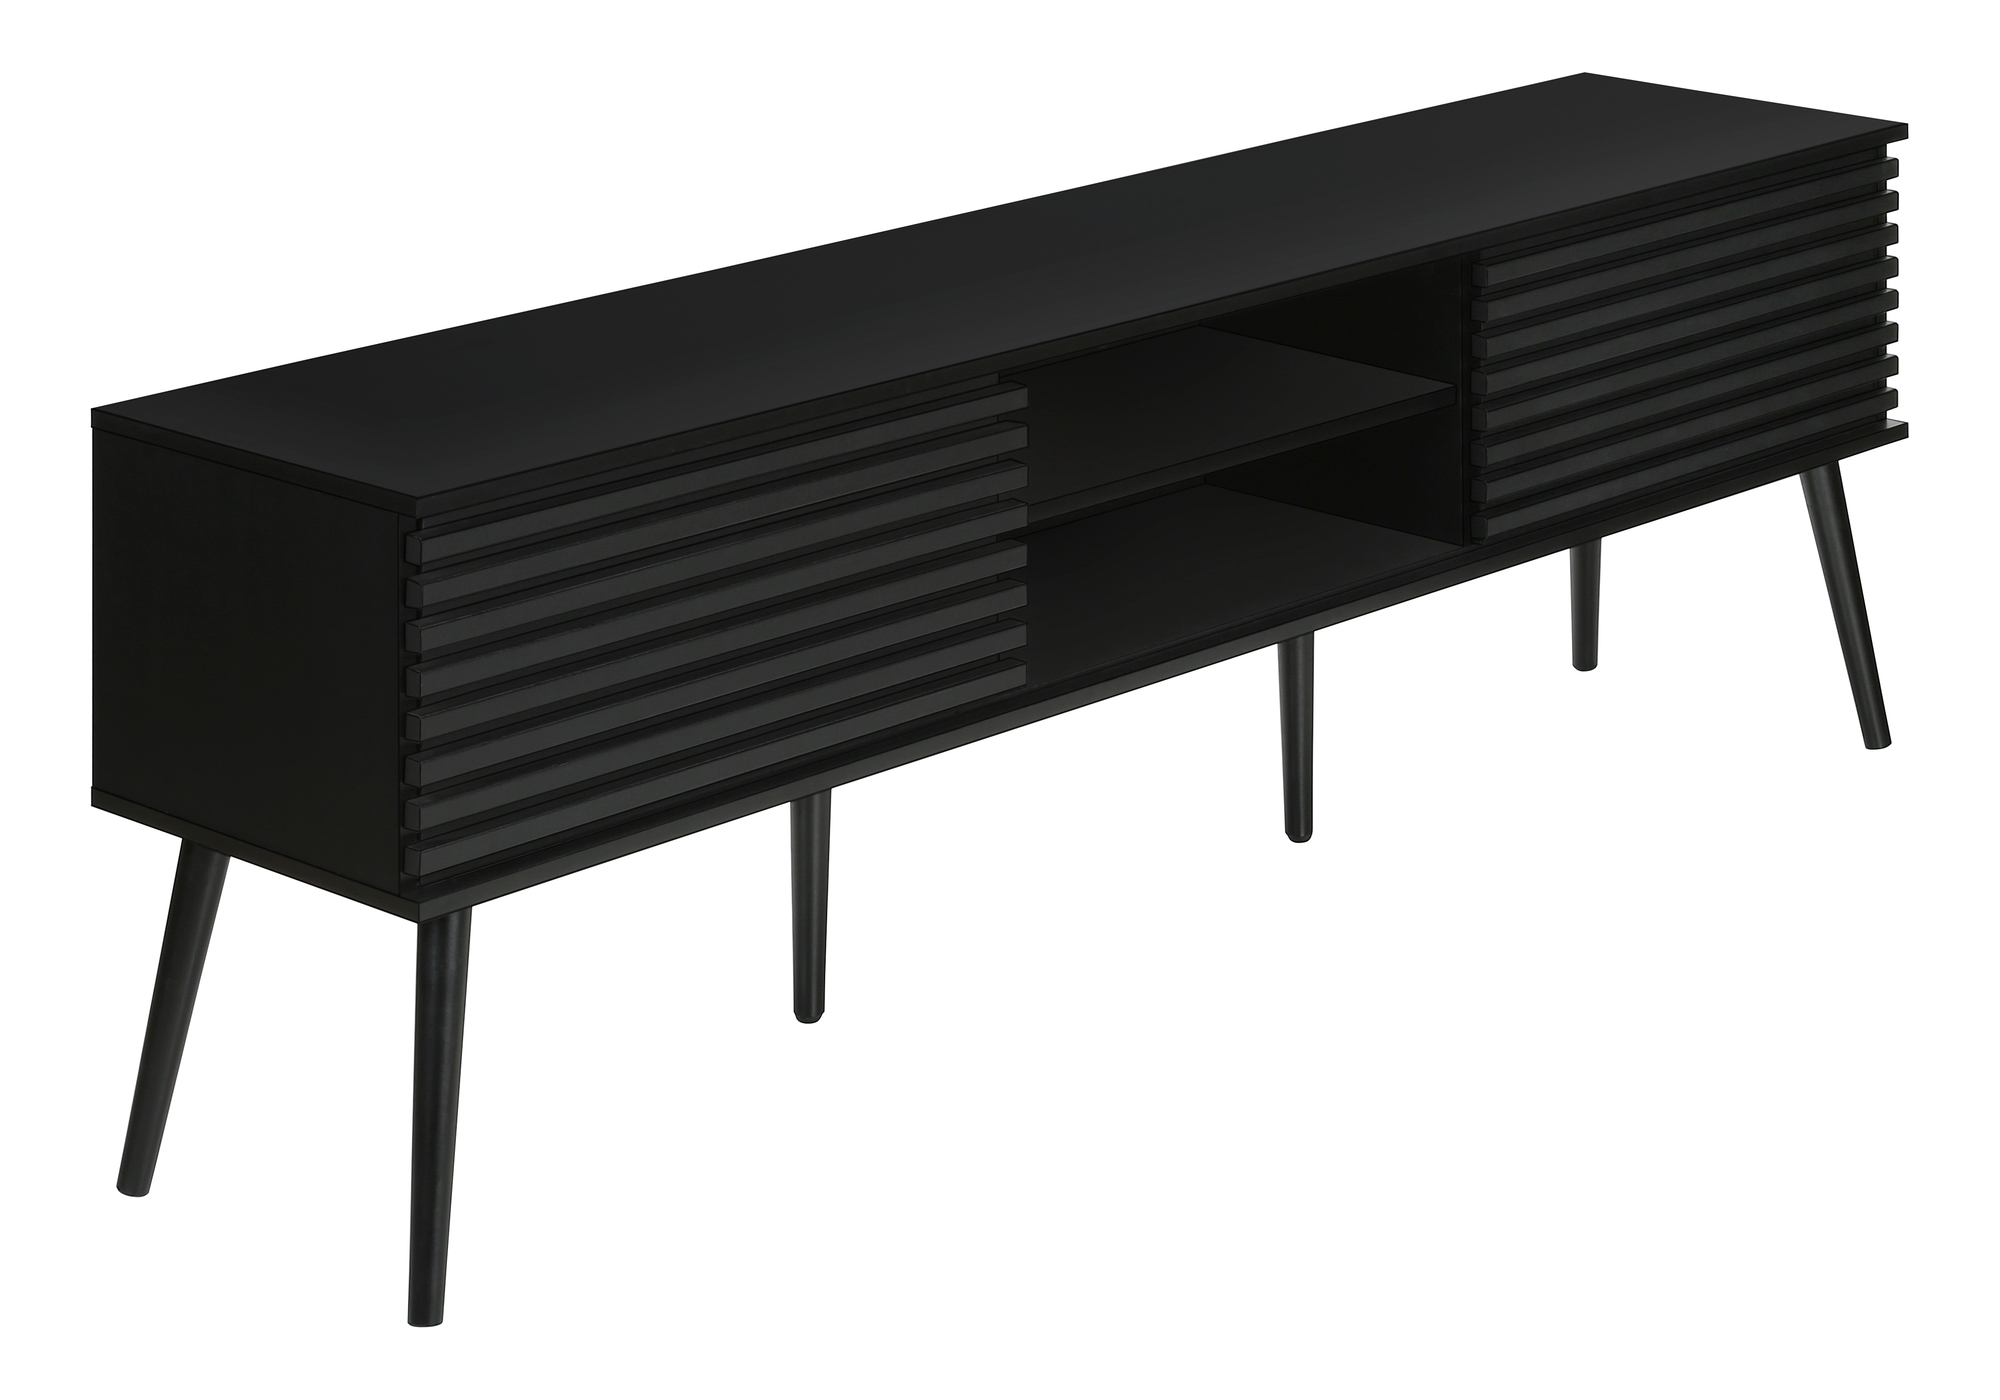 TV STAND - 72"L / BLACK WITH 2 DOORS